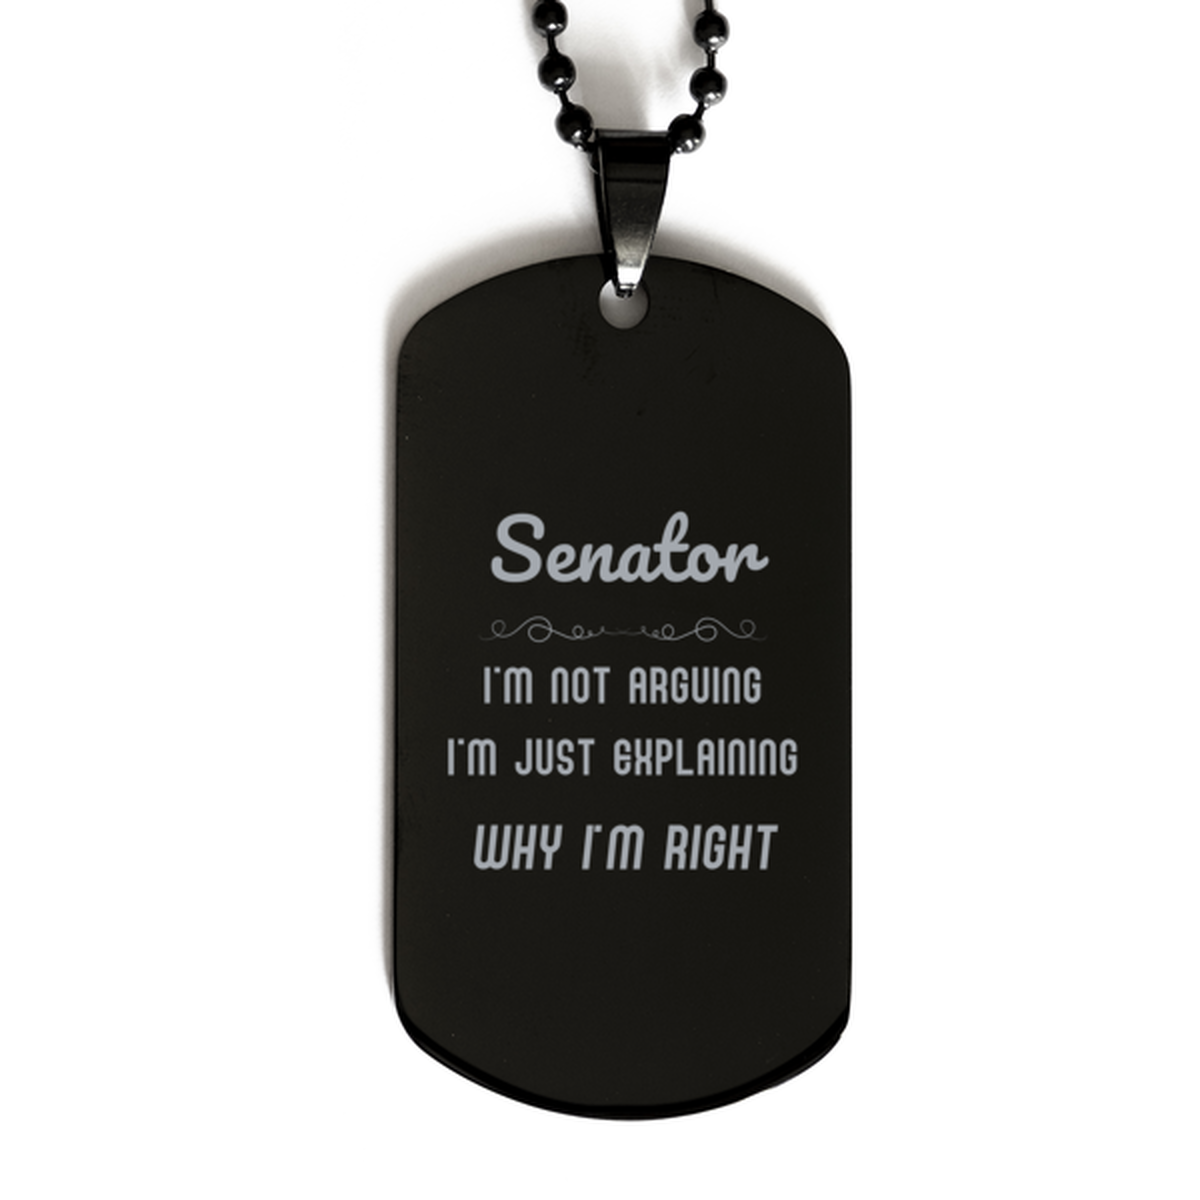 Senator I'm not Arguing. I'm Just Explaining Why I'm RIGHT Black Dog Tag, Funny Saying Quote Senator Gifts For Senator Graduation Birthday Christmas Gifts for Men Women Coworker